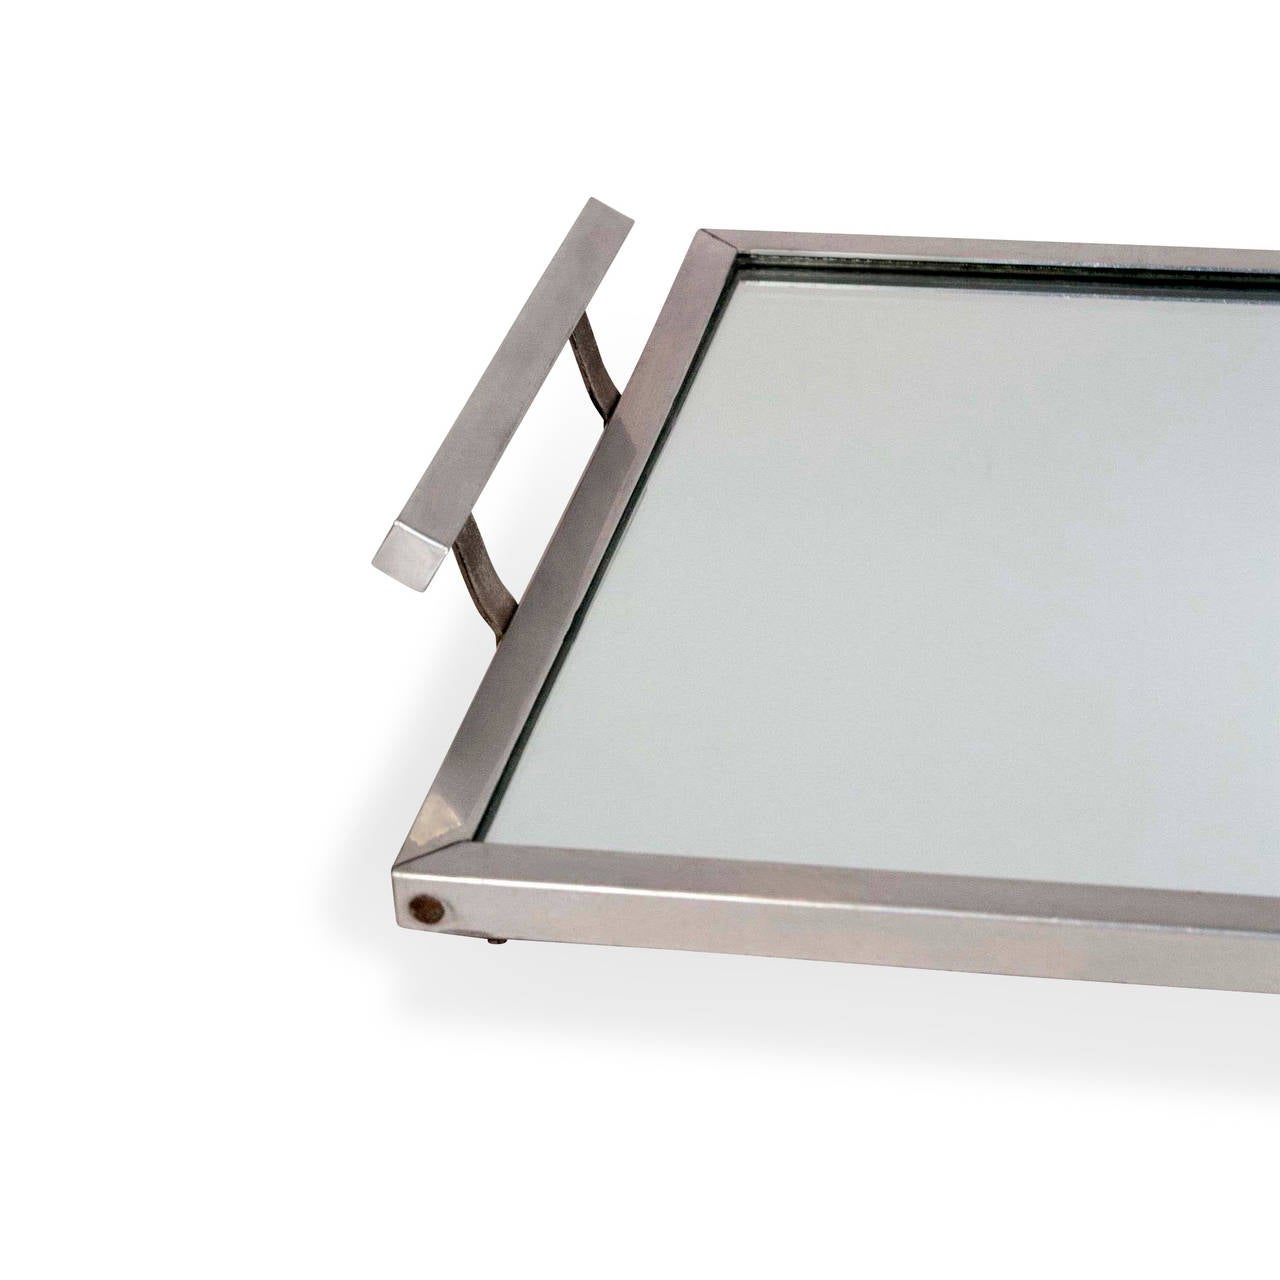 Aluminium frame serving tray with mirror surface, with wood underside backing, French 1930s. 25 1/4 in x 14 1/2 in. (Item #1746)